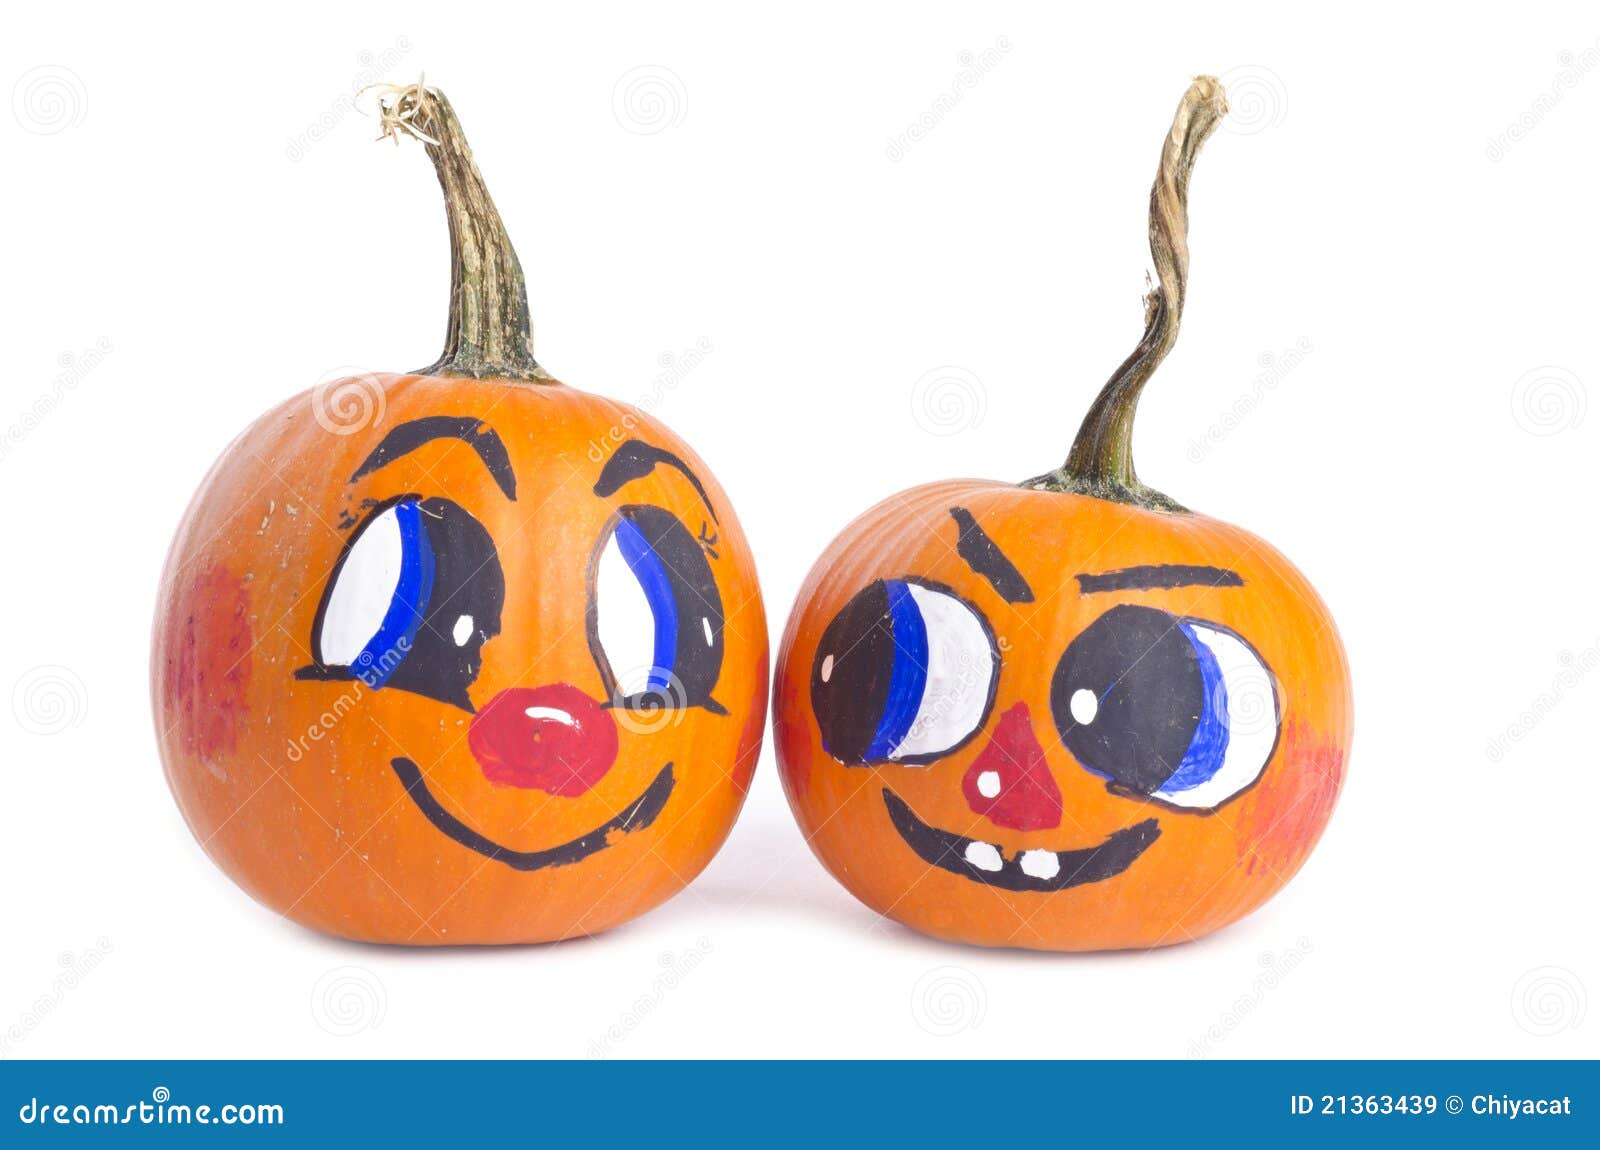 Small Pumpkins On White Background Royalty Free Stock ...